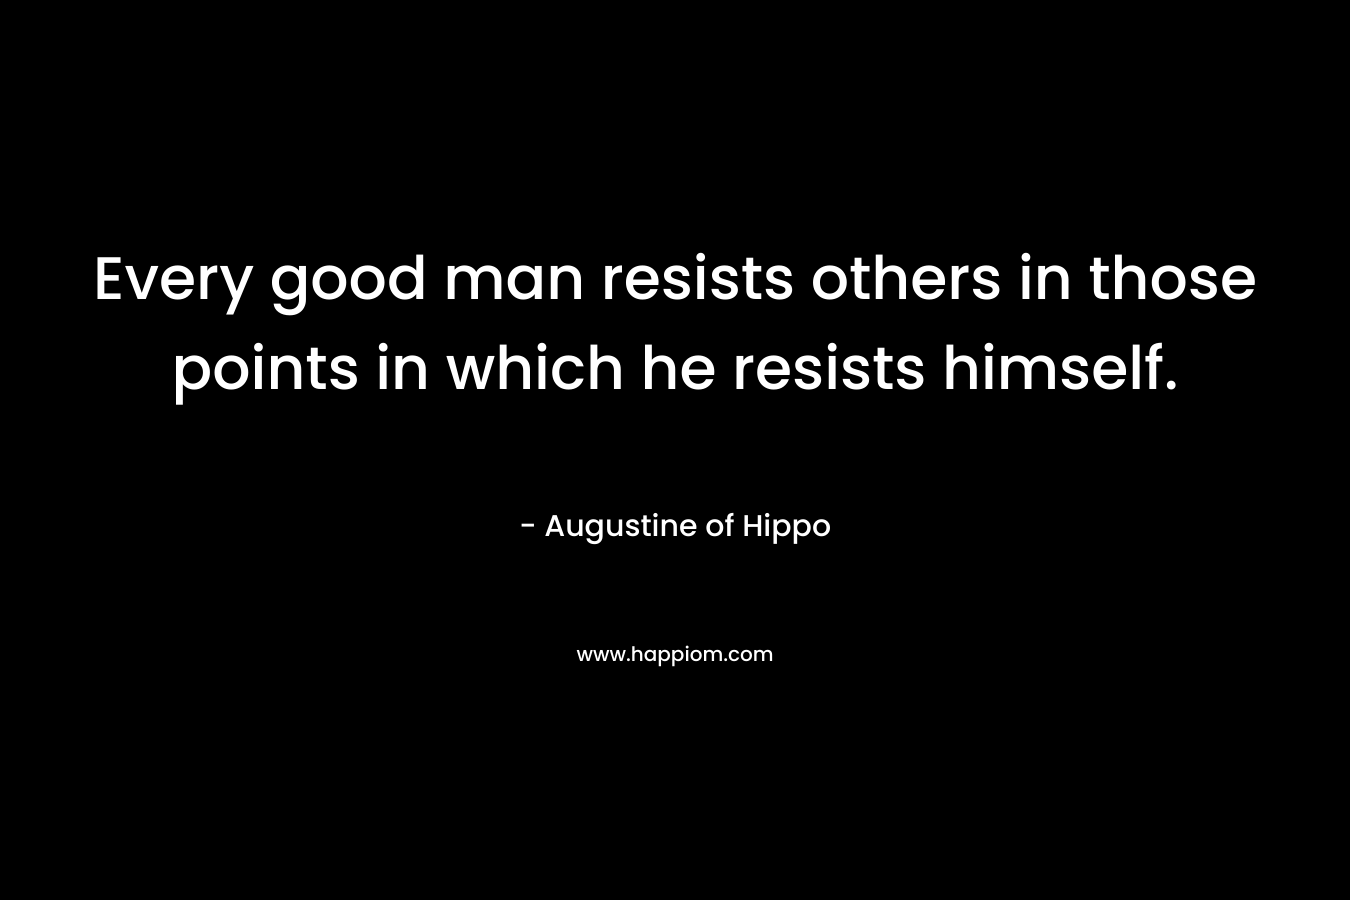 Every good man resists others in those points in which he resists himself. – Augustine of Hippo